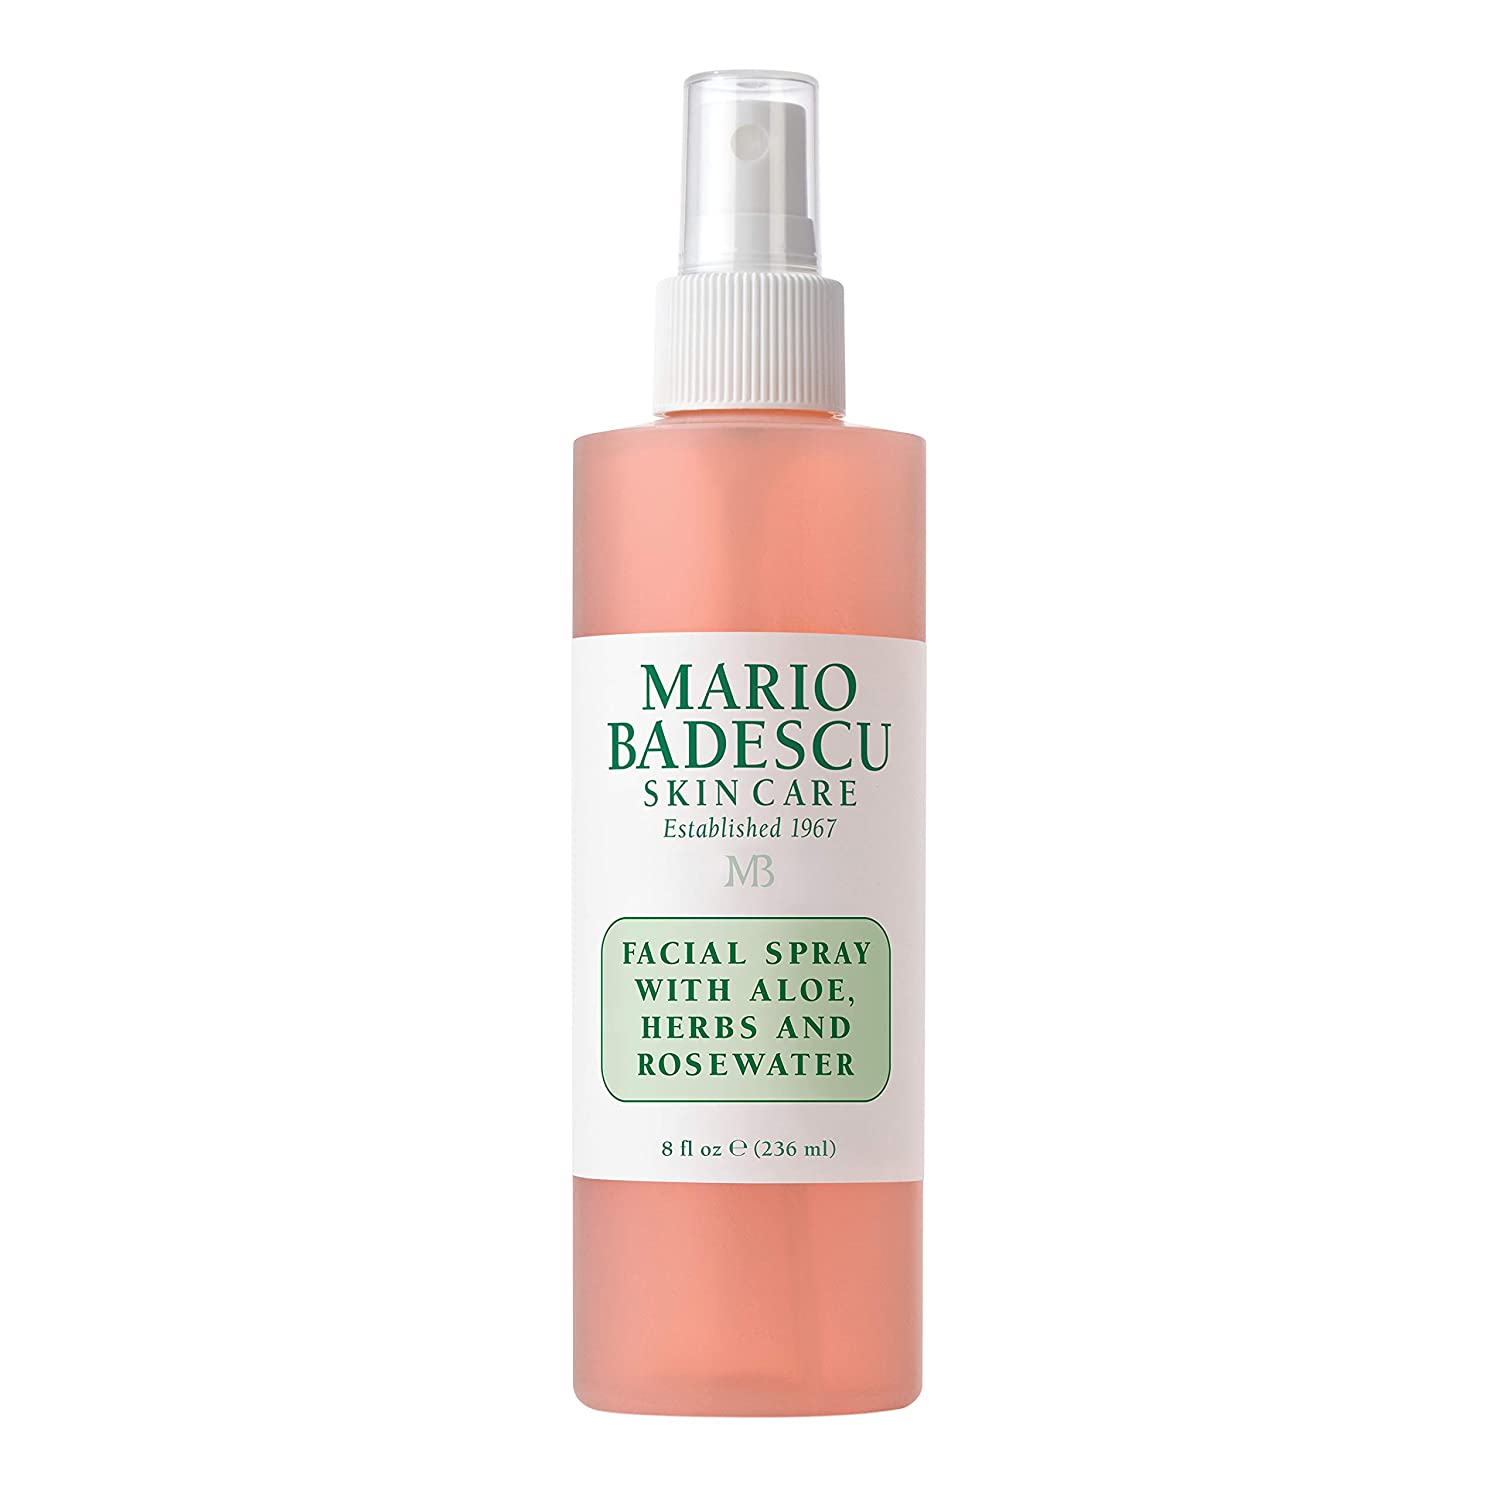 Mario Badescu, Facial Spray with Aloe, Herbs and Rosewater (Source: www.amazon.in)